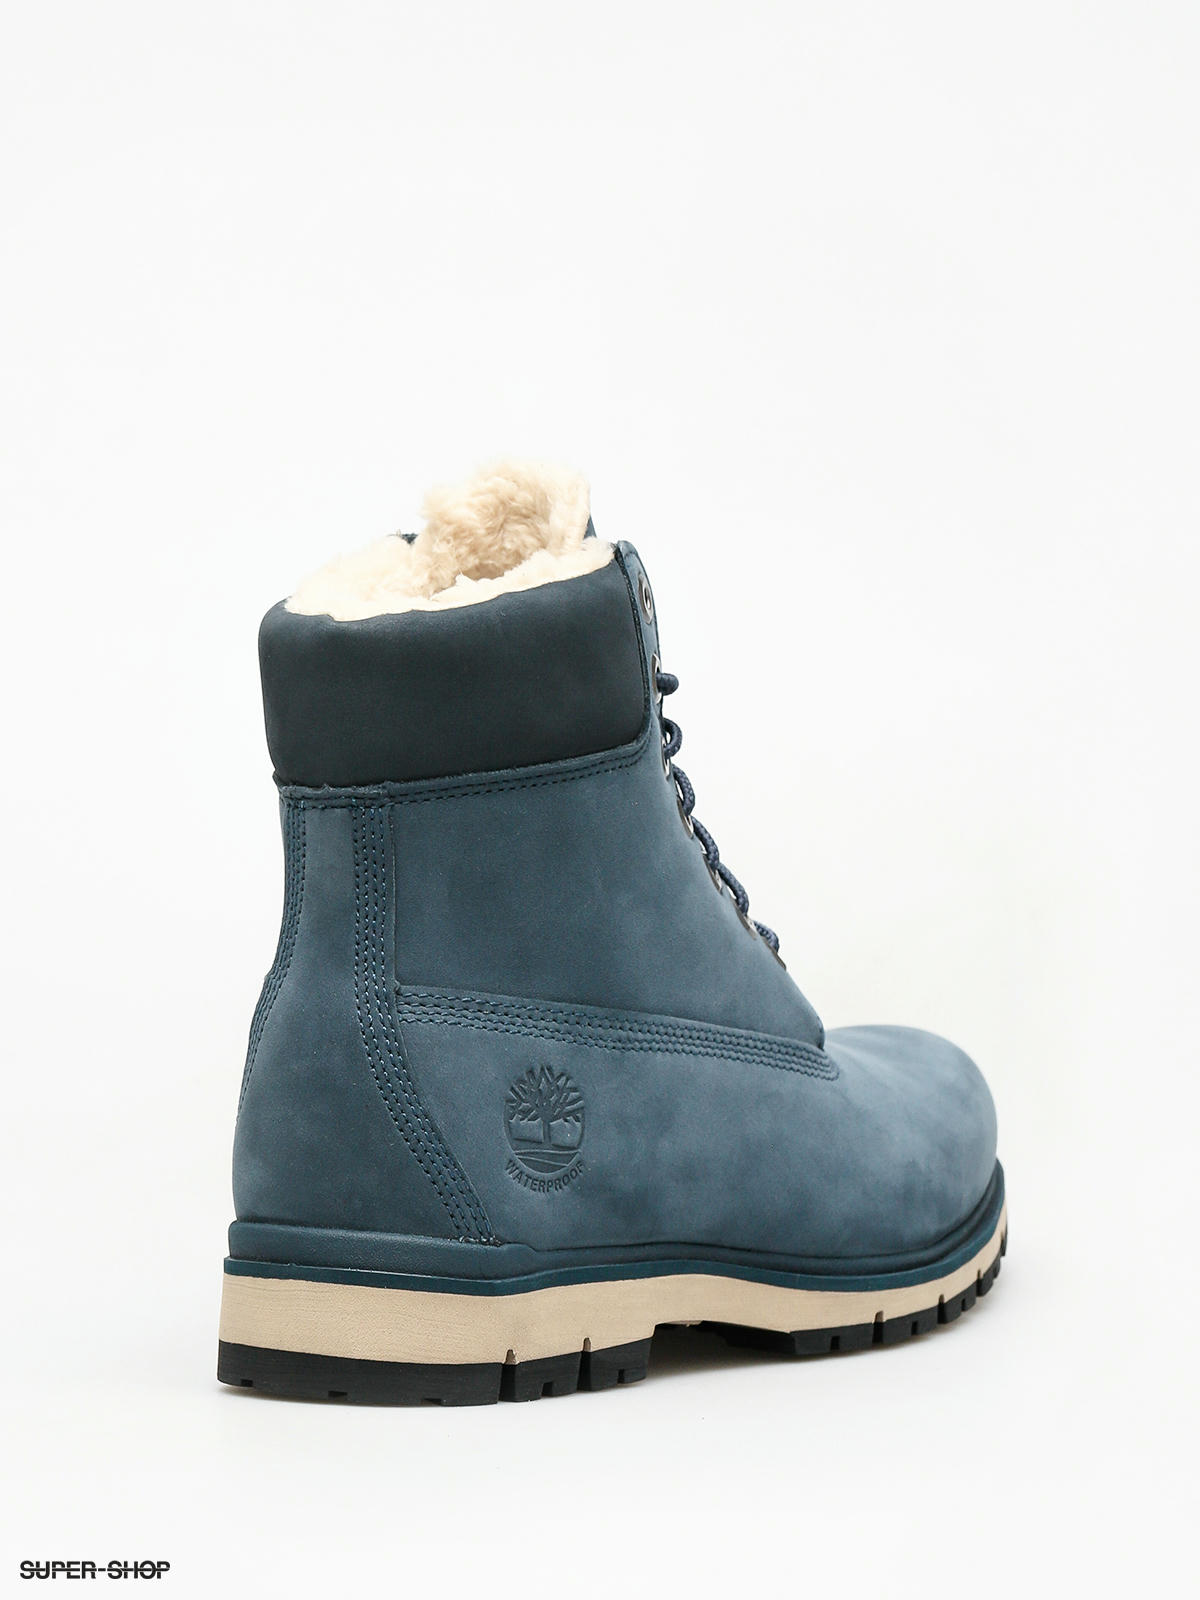 warm winter boots on sale